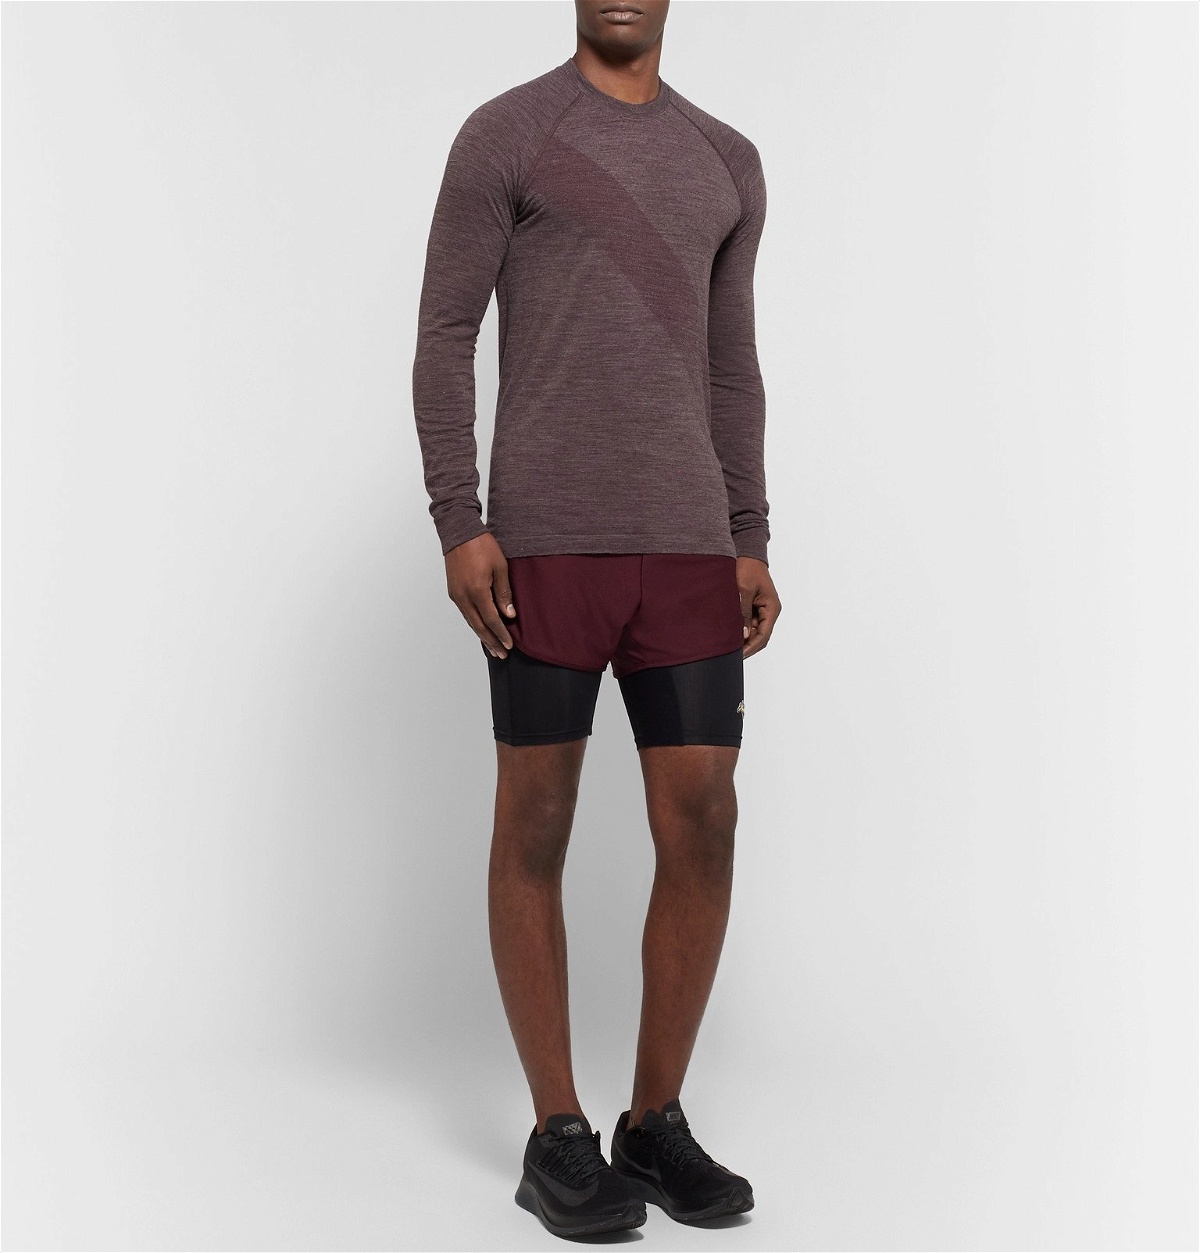 Tracksmith Brighton Base Layer Long Sleeve Review - Agent Athletica